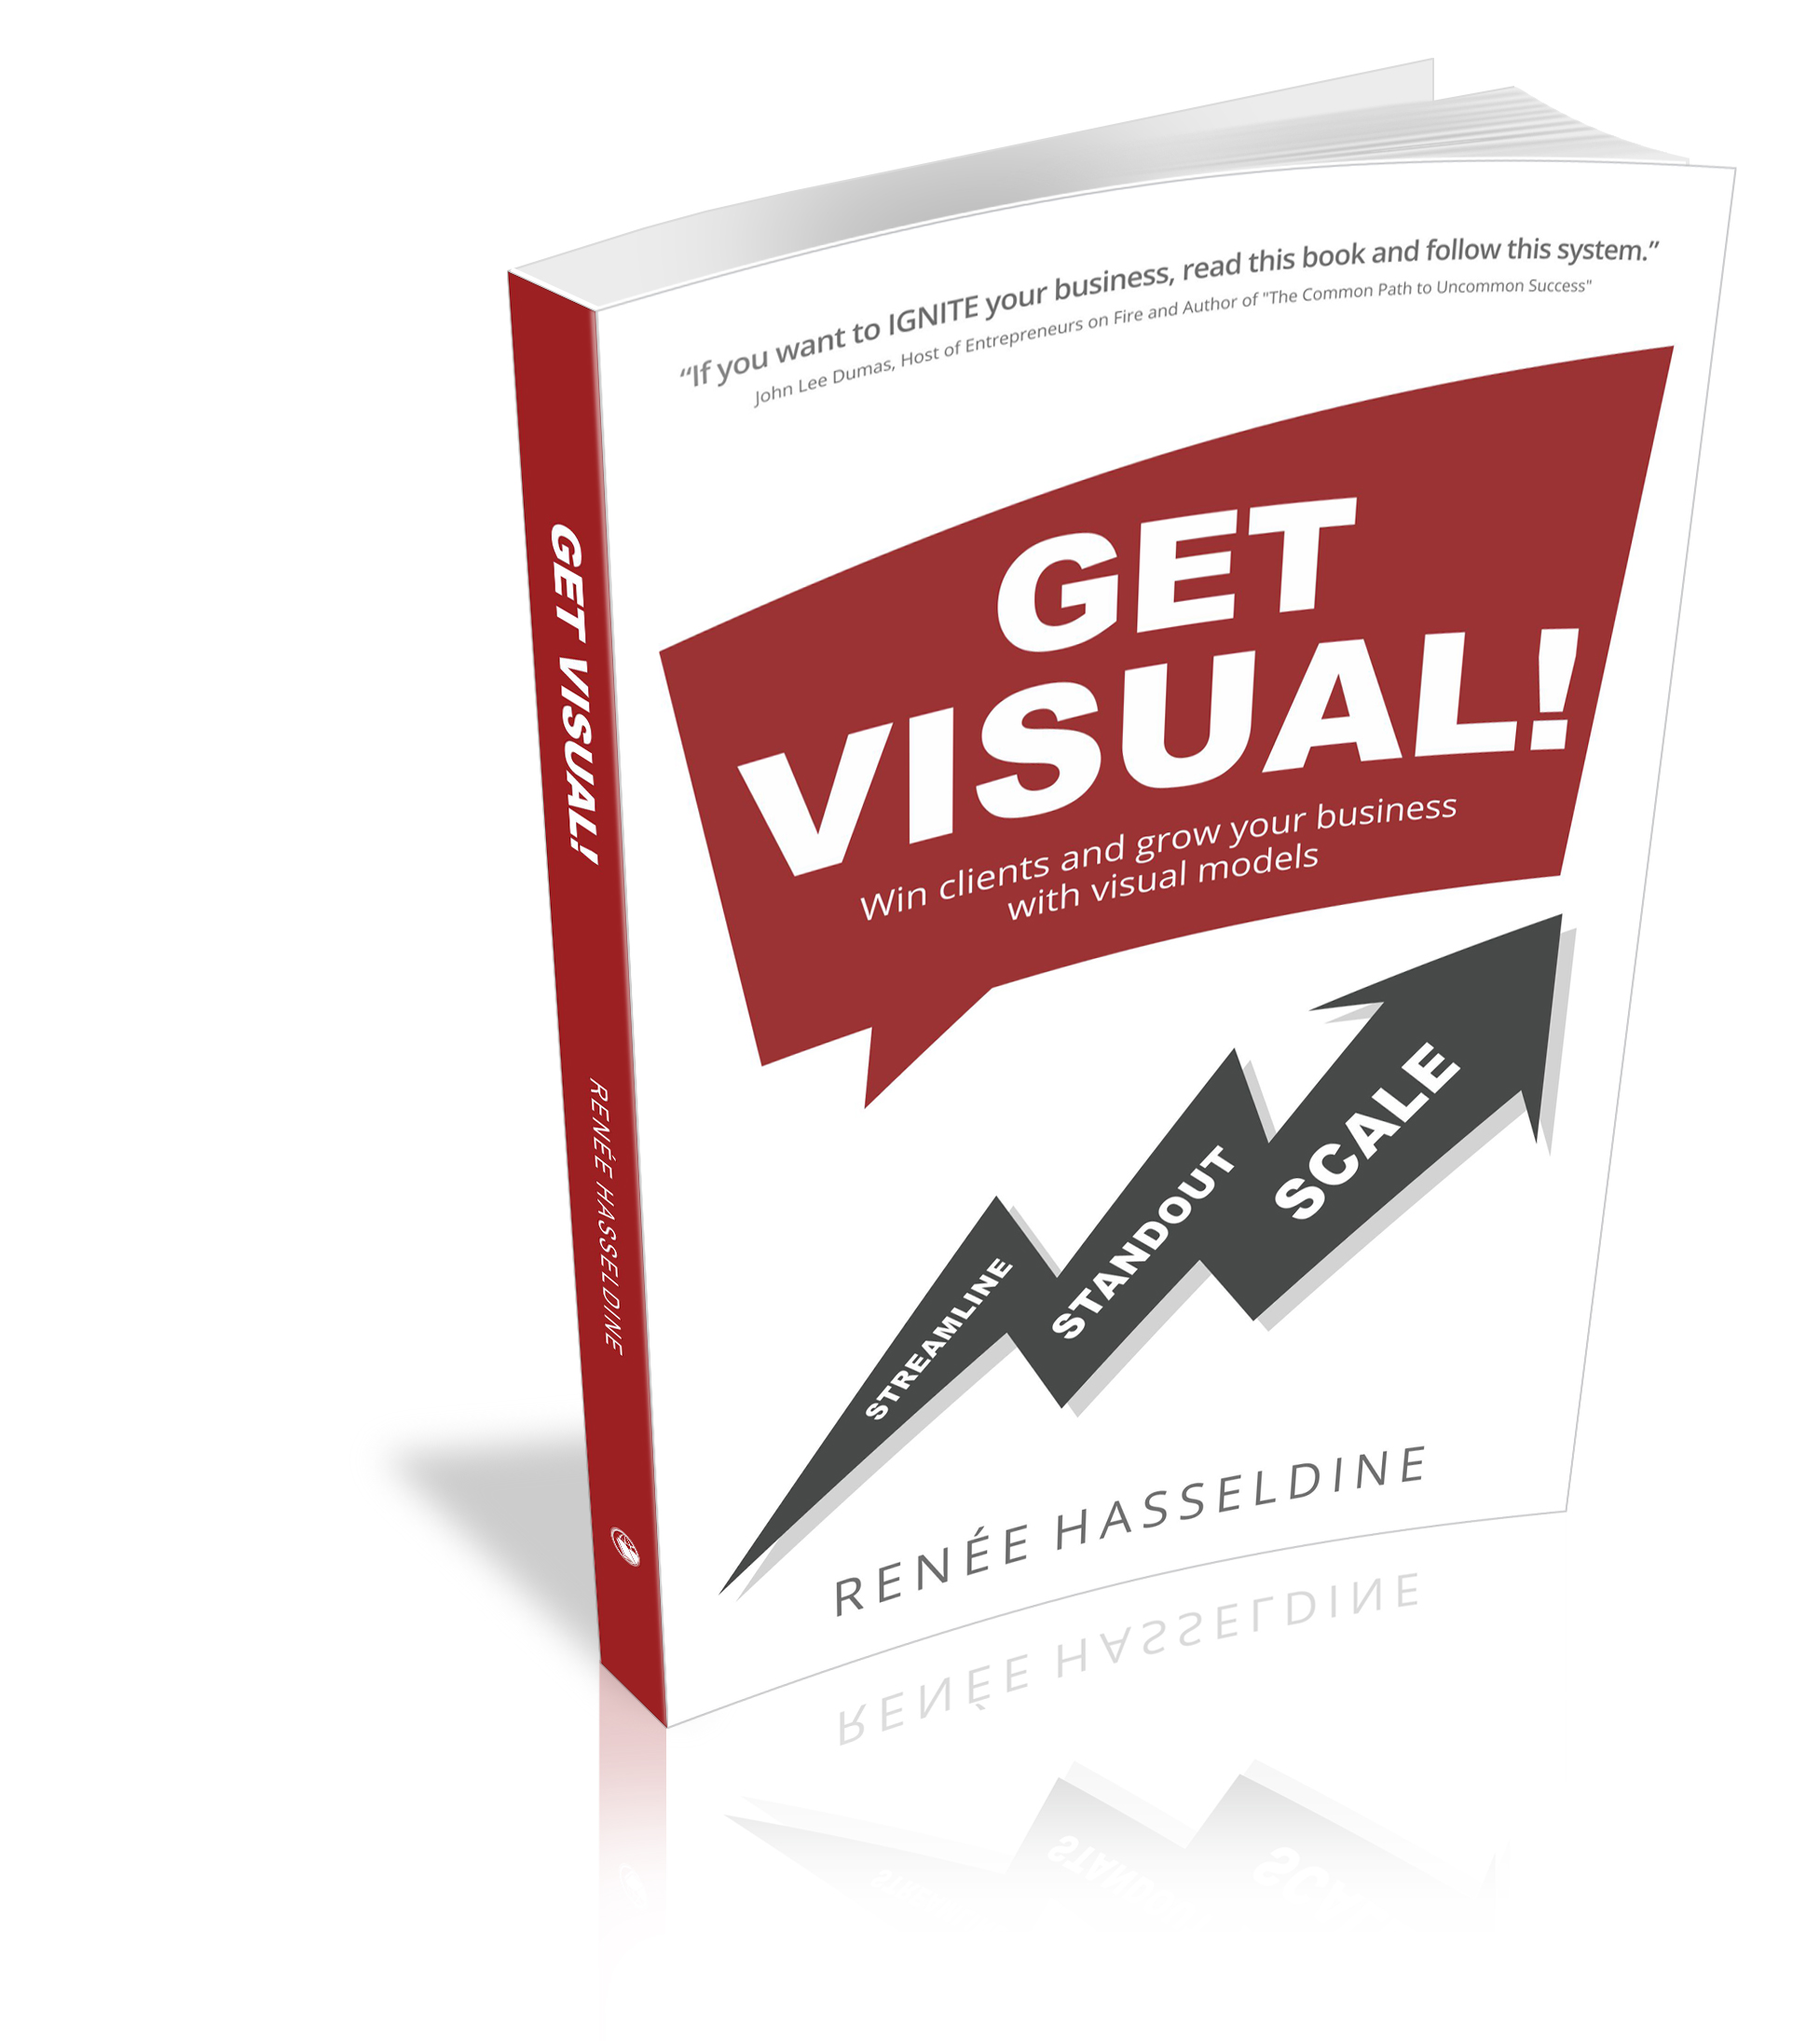 Get Visual! Book Cover